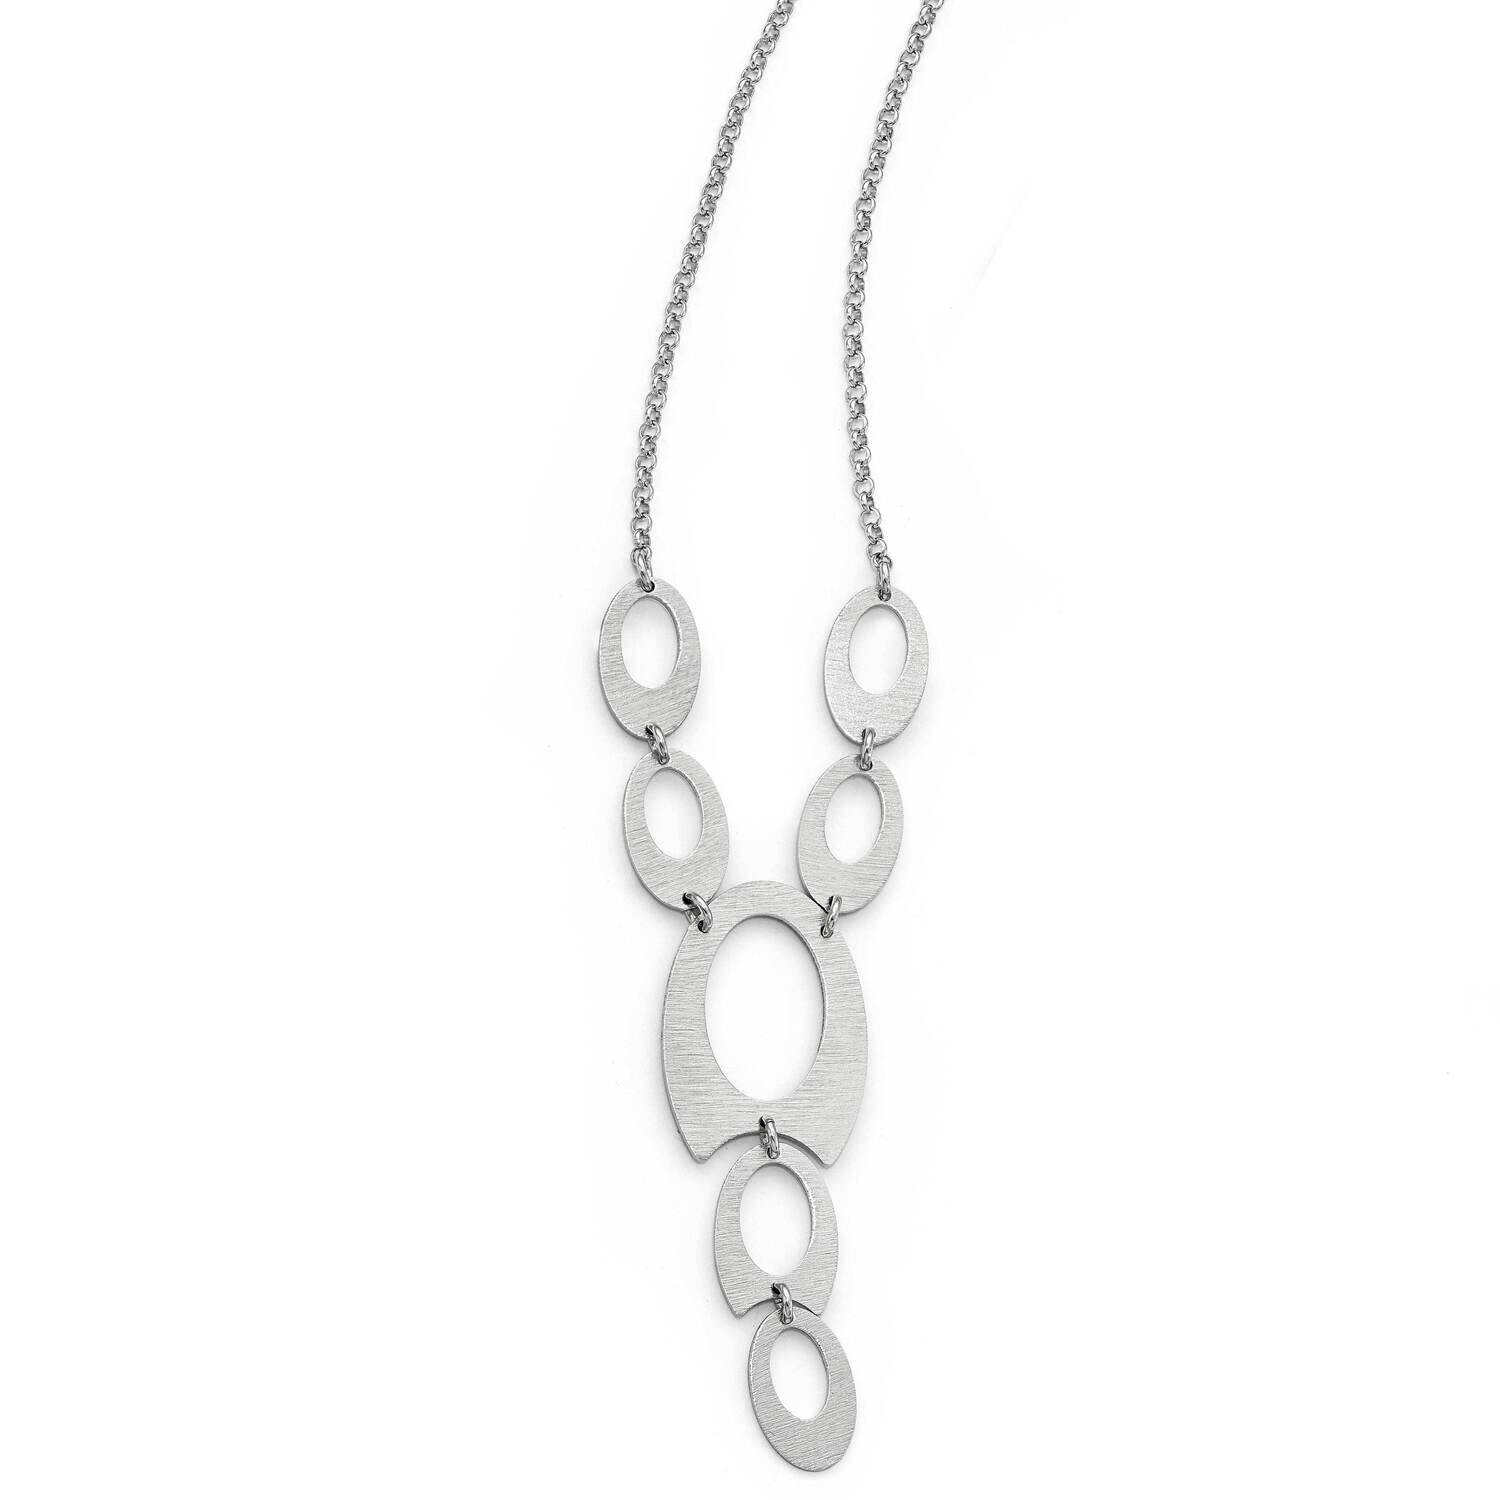 Brushed 1.5 Inch Extender Necklace Sterling Silver QLF691-16.5